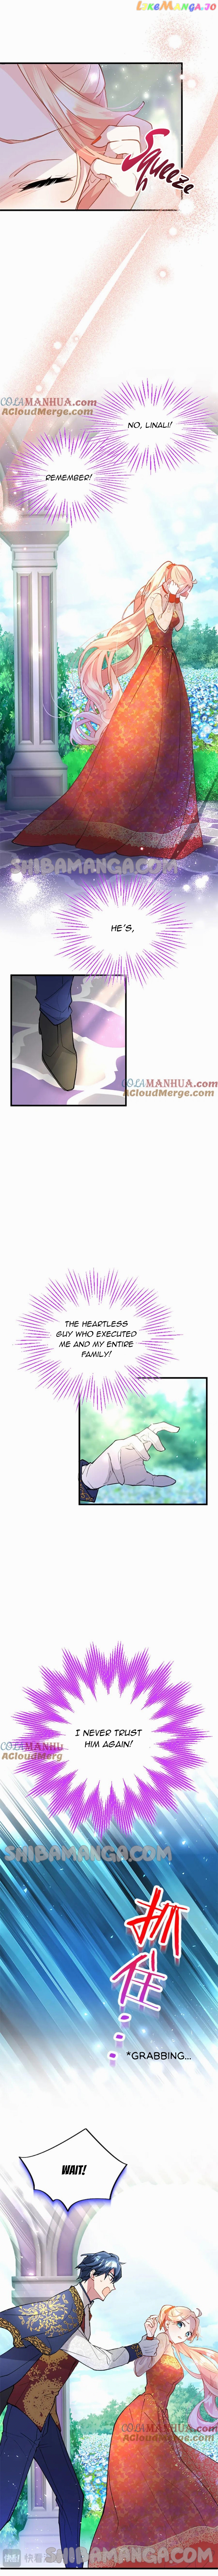 The Reason Why The Twin Lady Crossdresses Chapter 35 - page 10